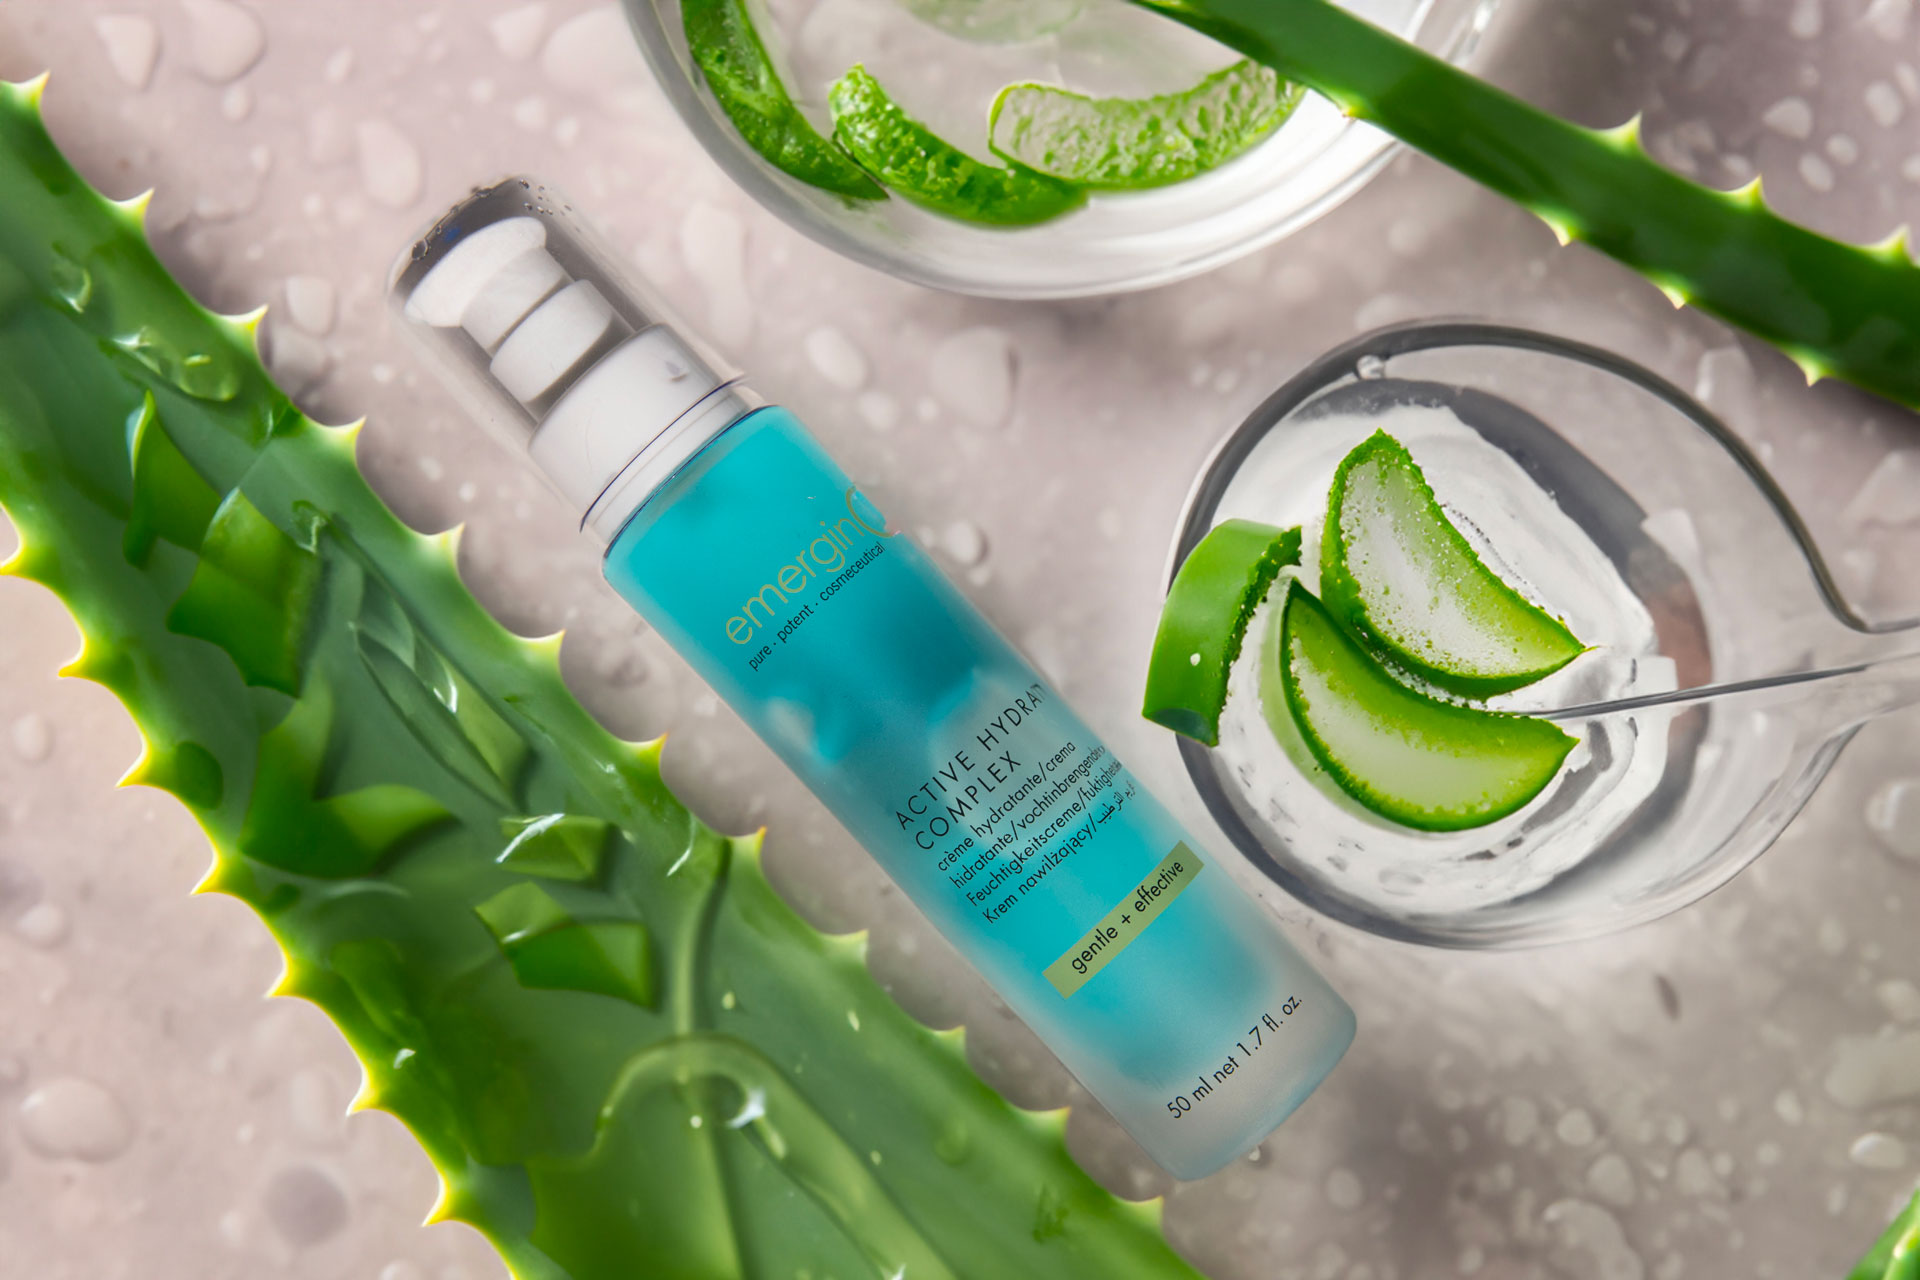 A skincare product bottle labeled "energizing comfort" surrounded by fresh aloe vera pieces, lime slices, and a glass of water, set on a reflective watery surface.